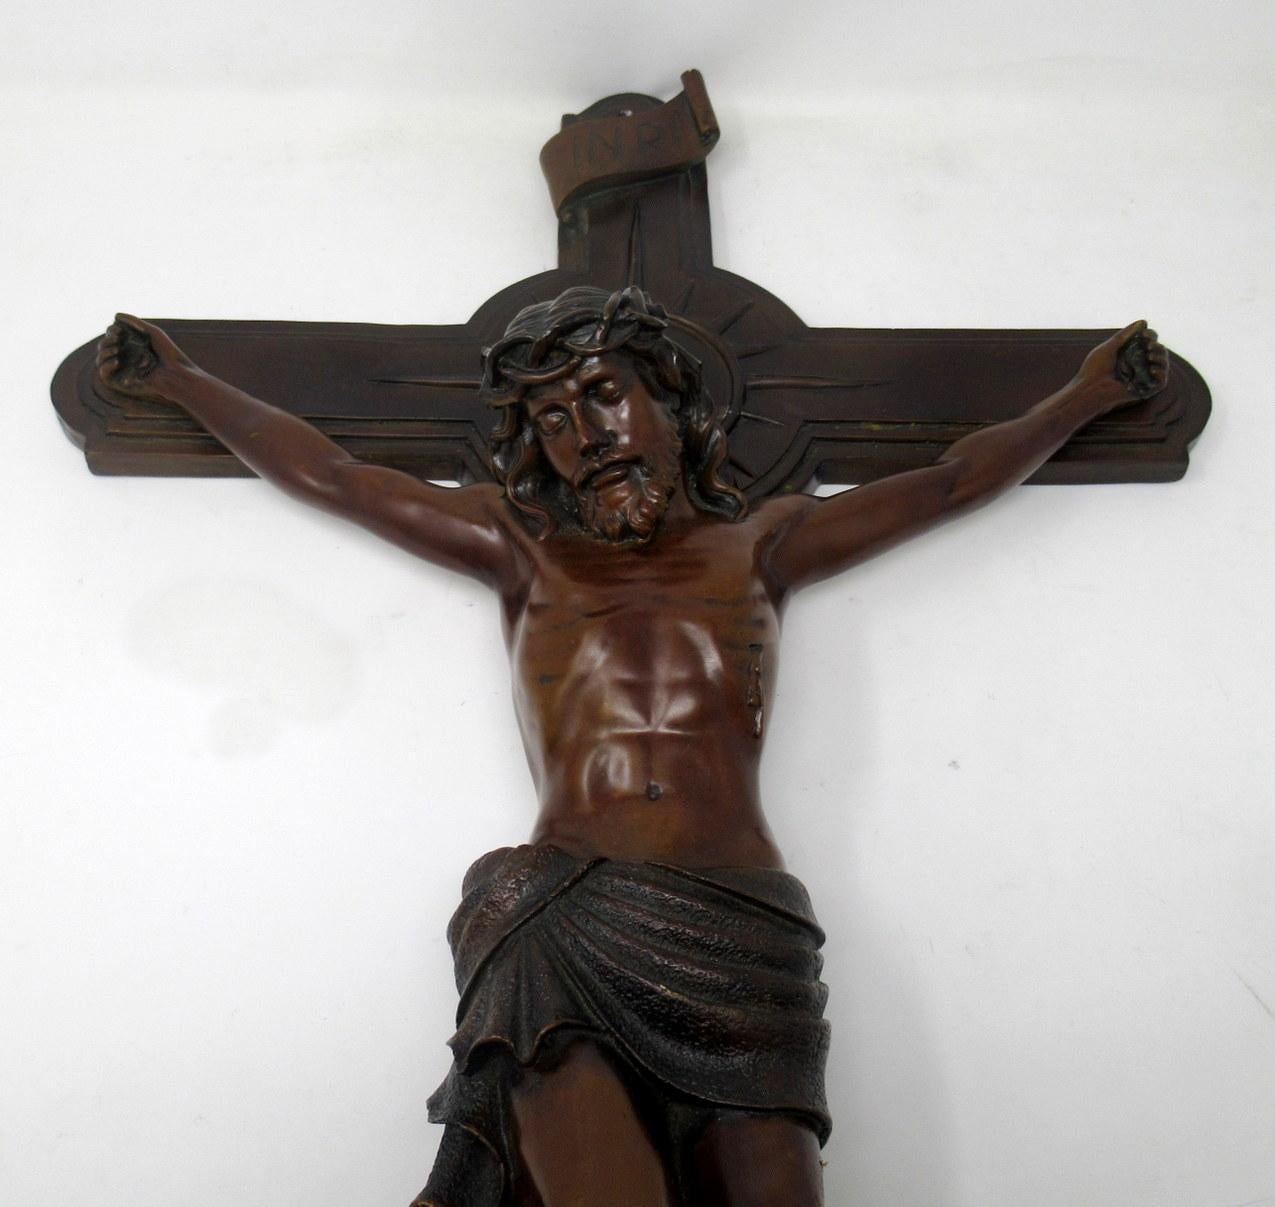 An exceptionally fine quality example of a well cast patinated dark bronze figure depicting Jesus Christ nailed to a cast metal bronzed hanging cross of impressive proportions, late 19th-early 20th century, of French or English